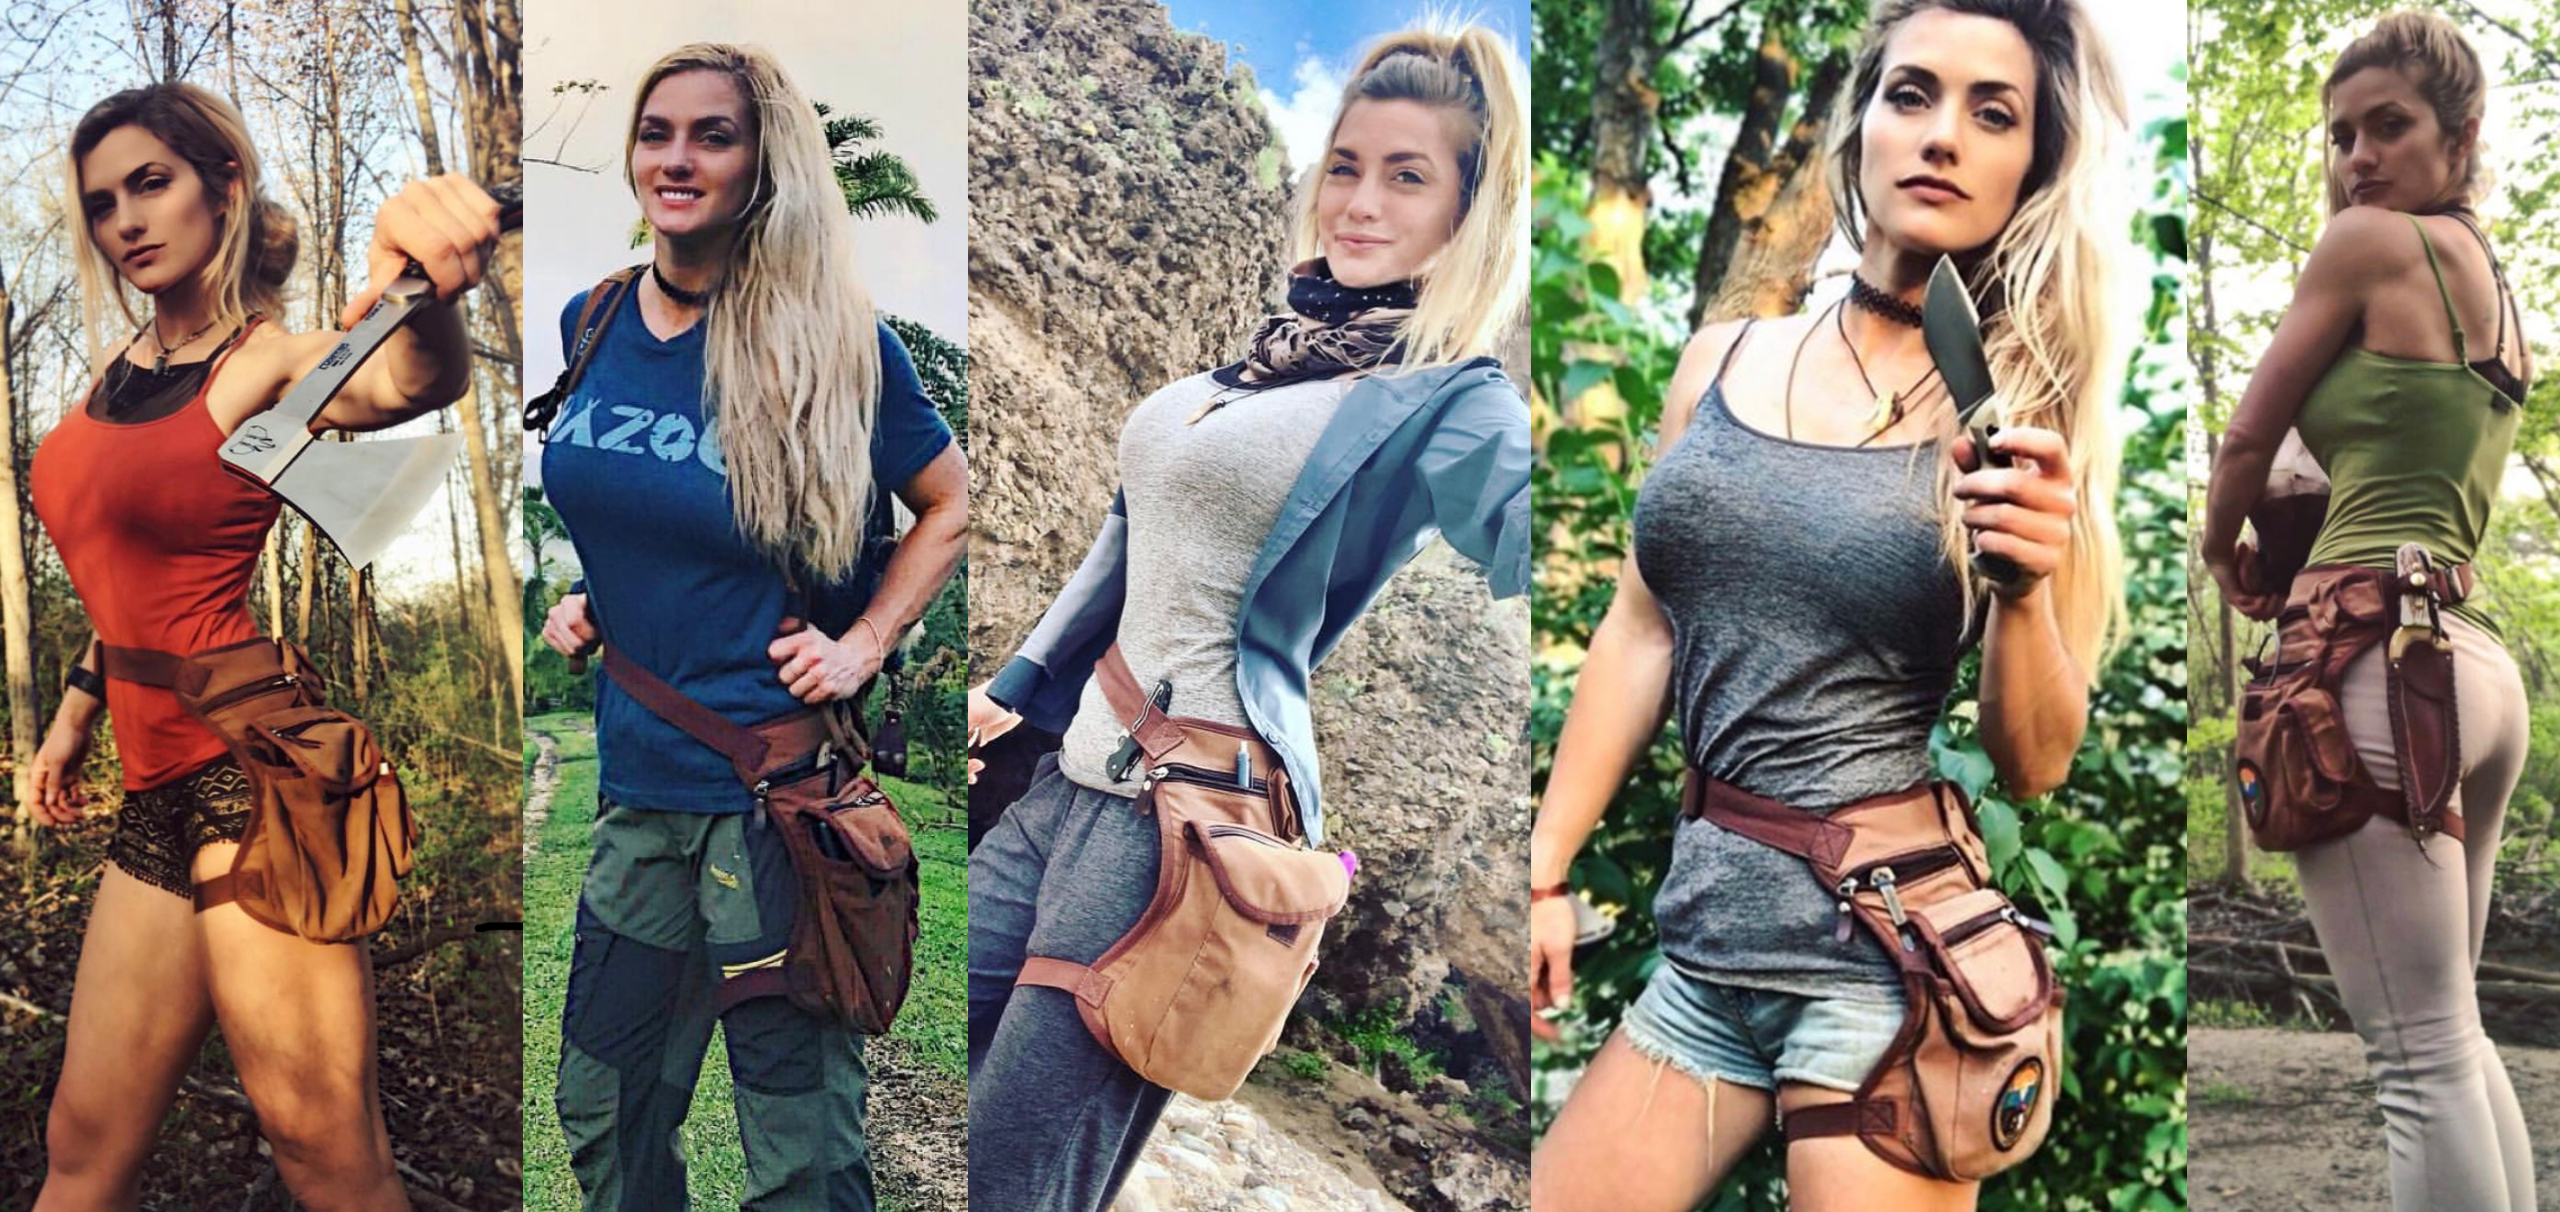 melissa miller naked and afraid - www.besthairstyletrends.com.